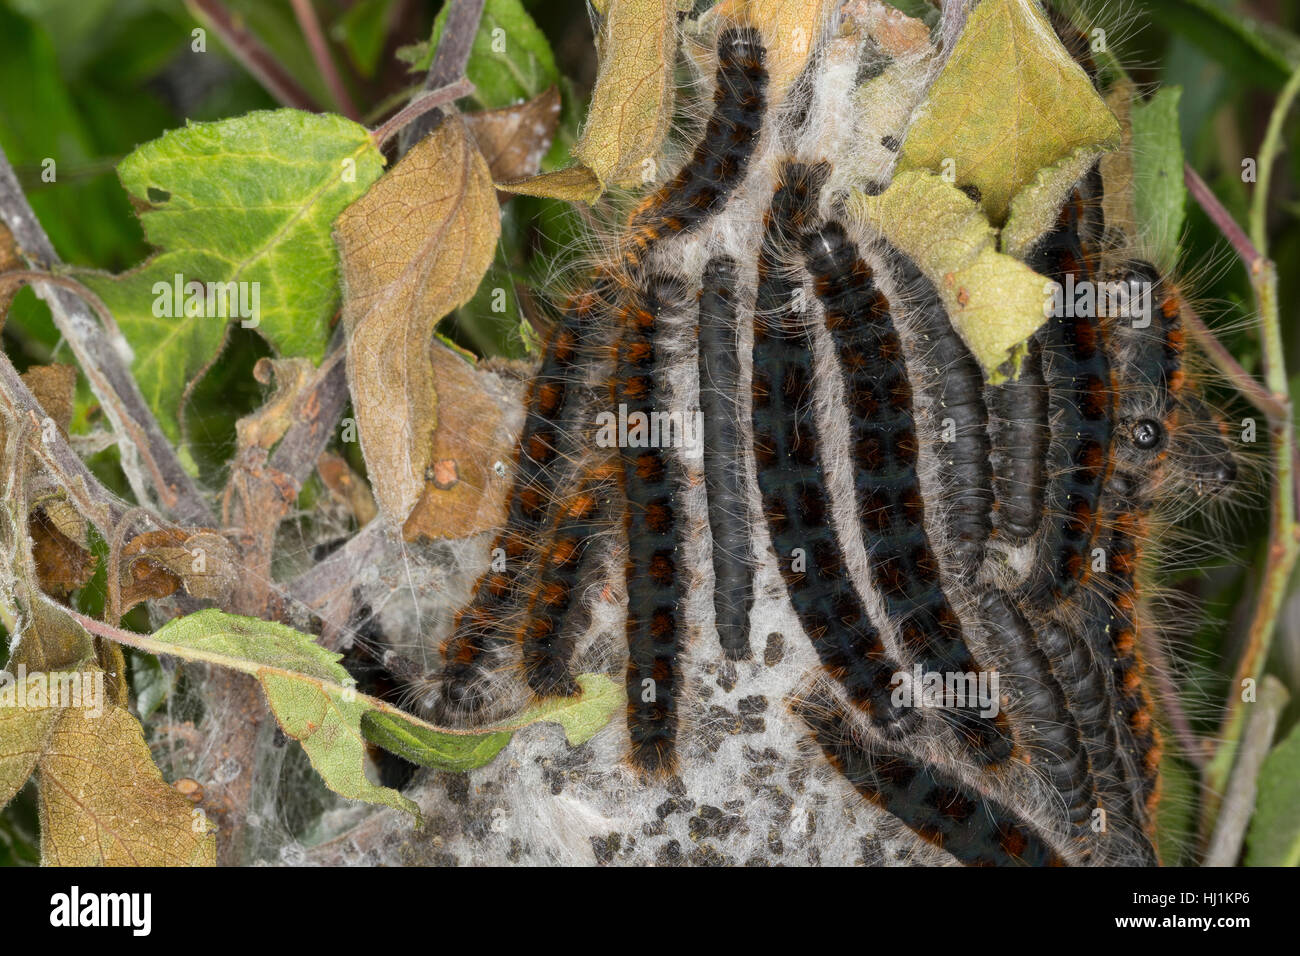 Wollafter, Frühlings-Wollafter, Raupe, Raupen und Raupengespinst, Eriogaster Lanestris, Bombyx Lanestris, kleine Eggar, Raupe, Raupen, Bombyx Stockfoto